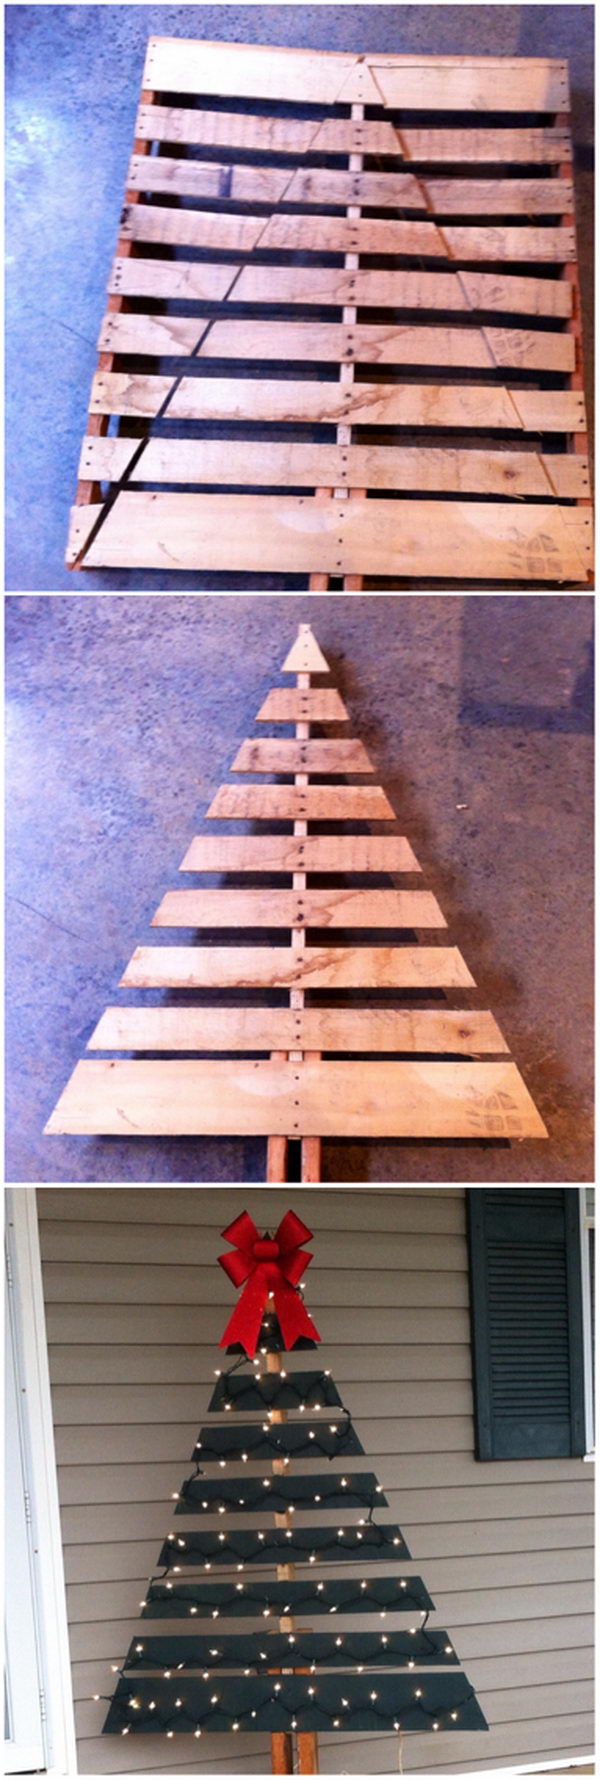 Pallet Christmas Tree for the Front Porch Decoration. 